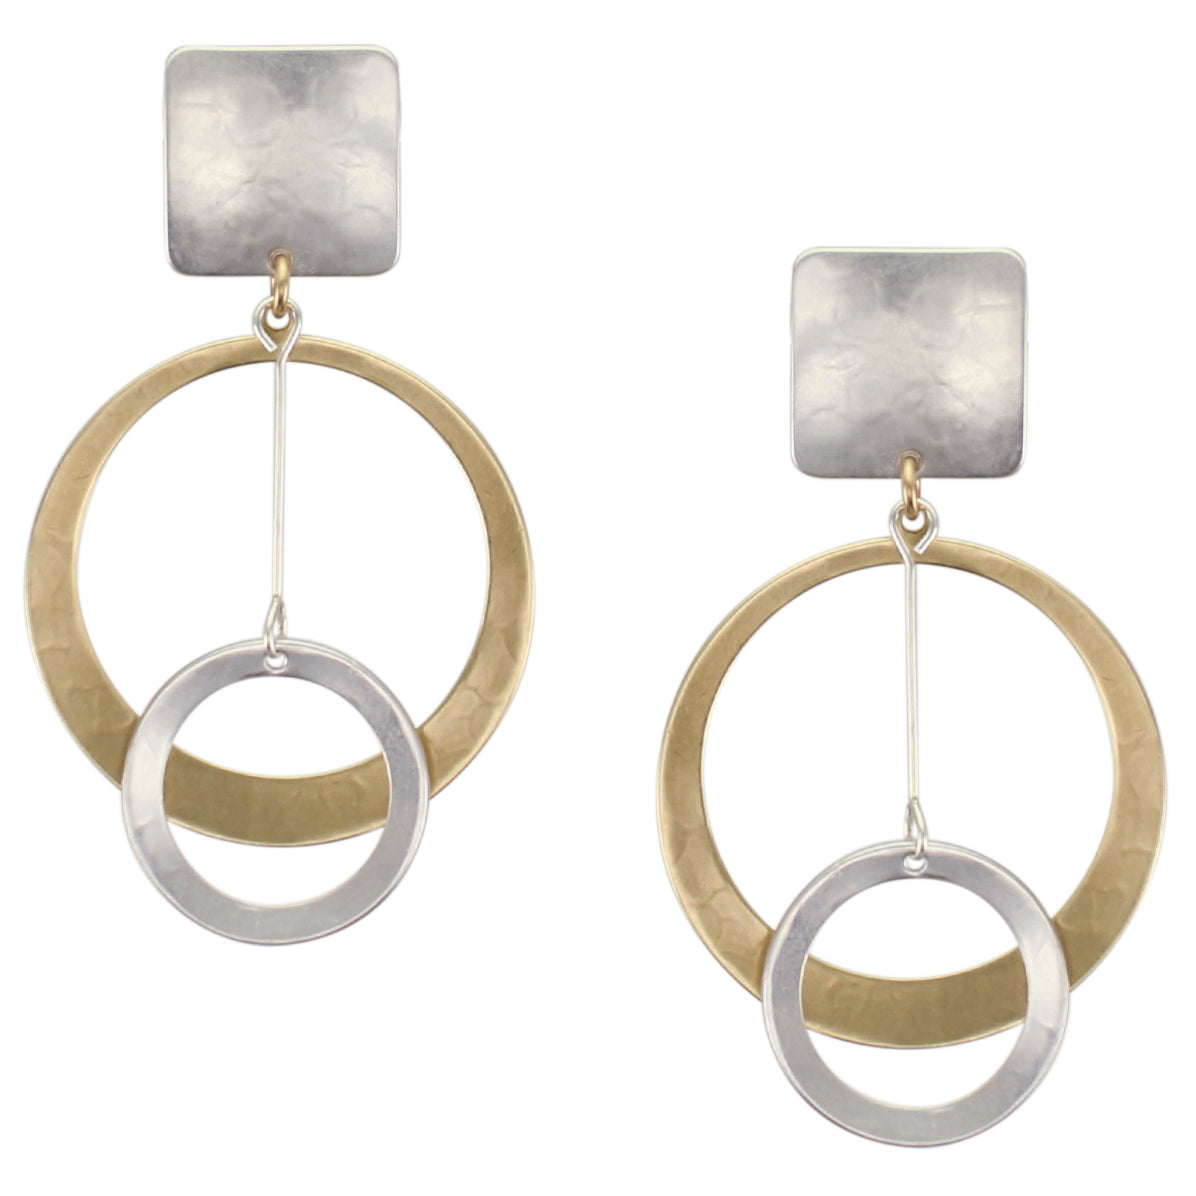 Square with Extra Large Dished Cutout Disc with Extended Ring Drop Post or Clip Earring